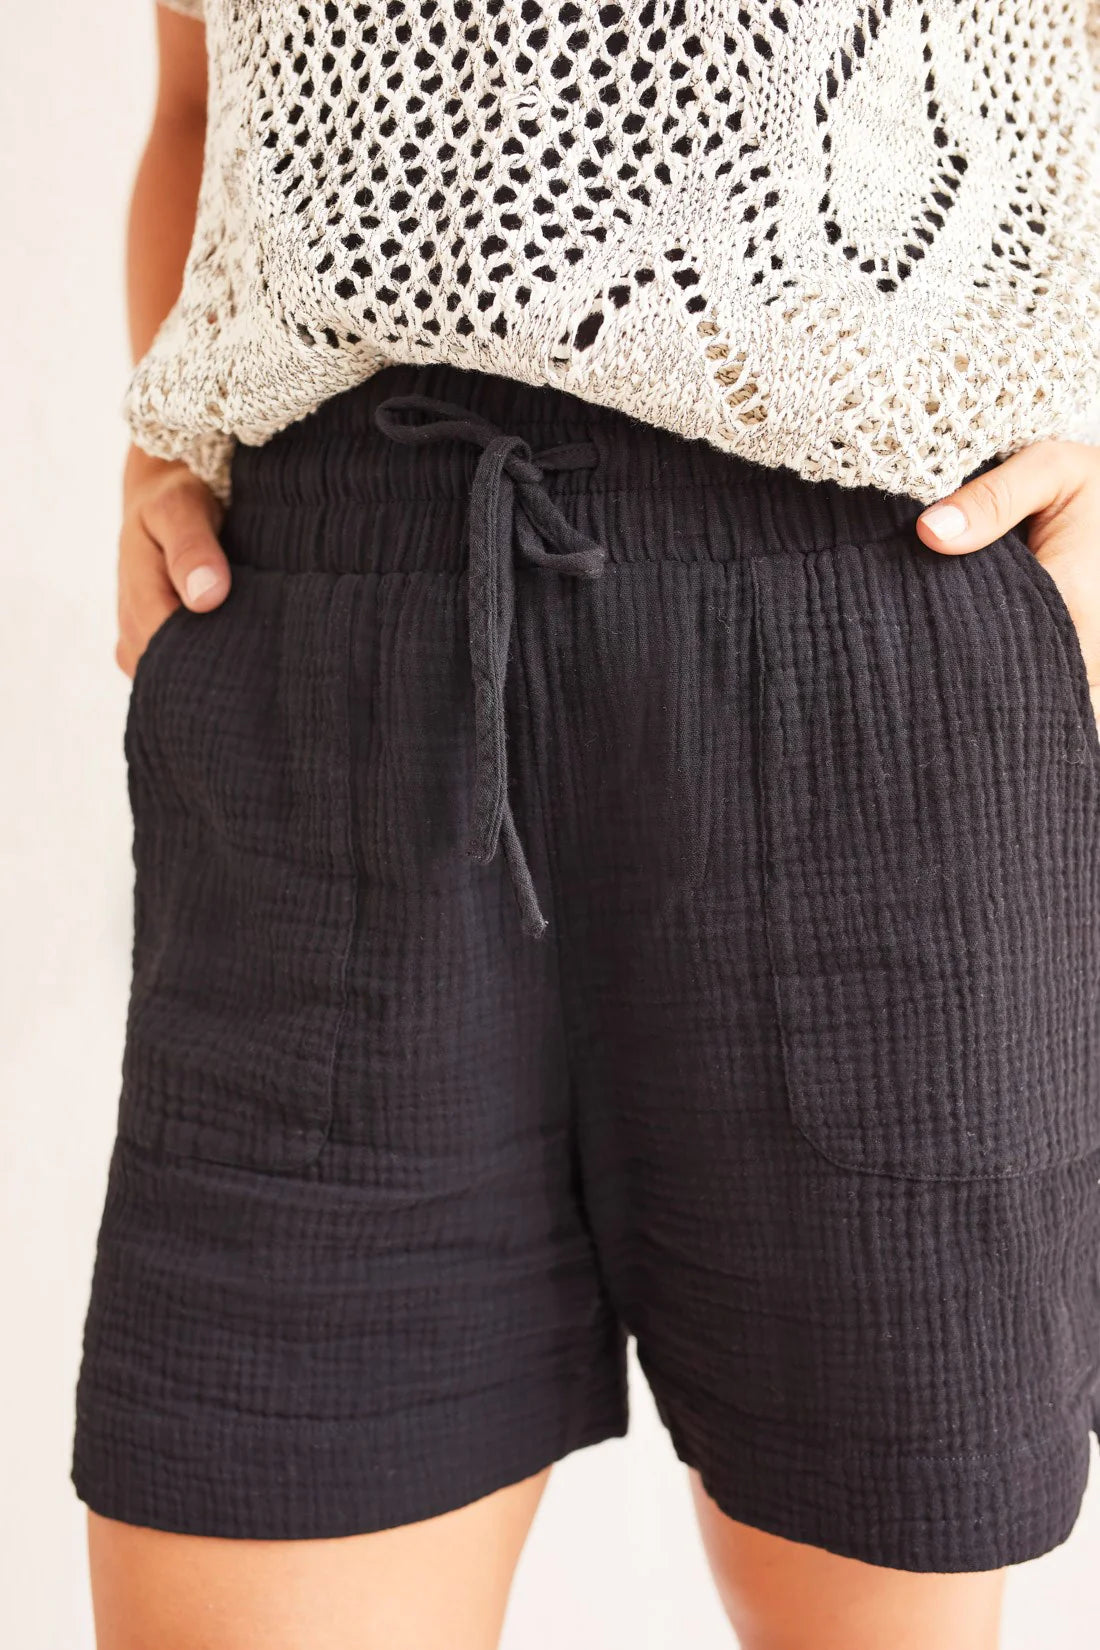 Cotton Gauze Shorts by Tribal